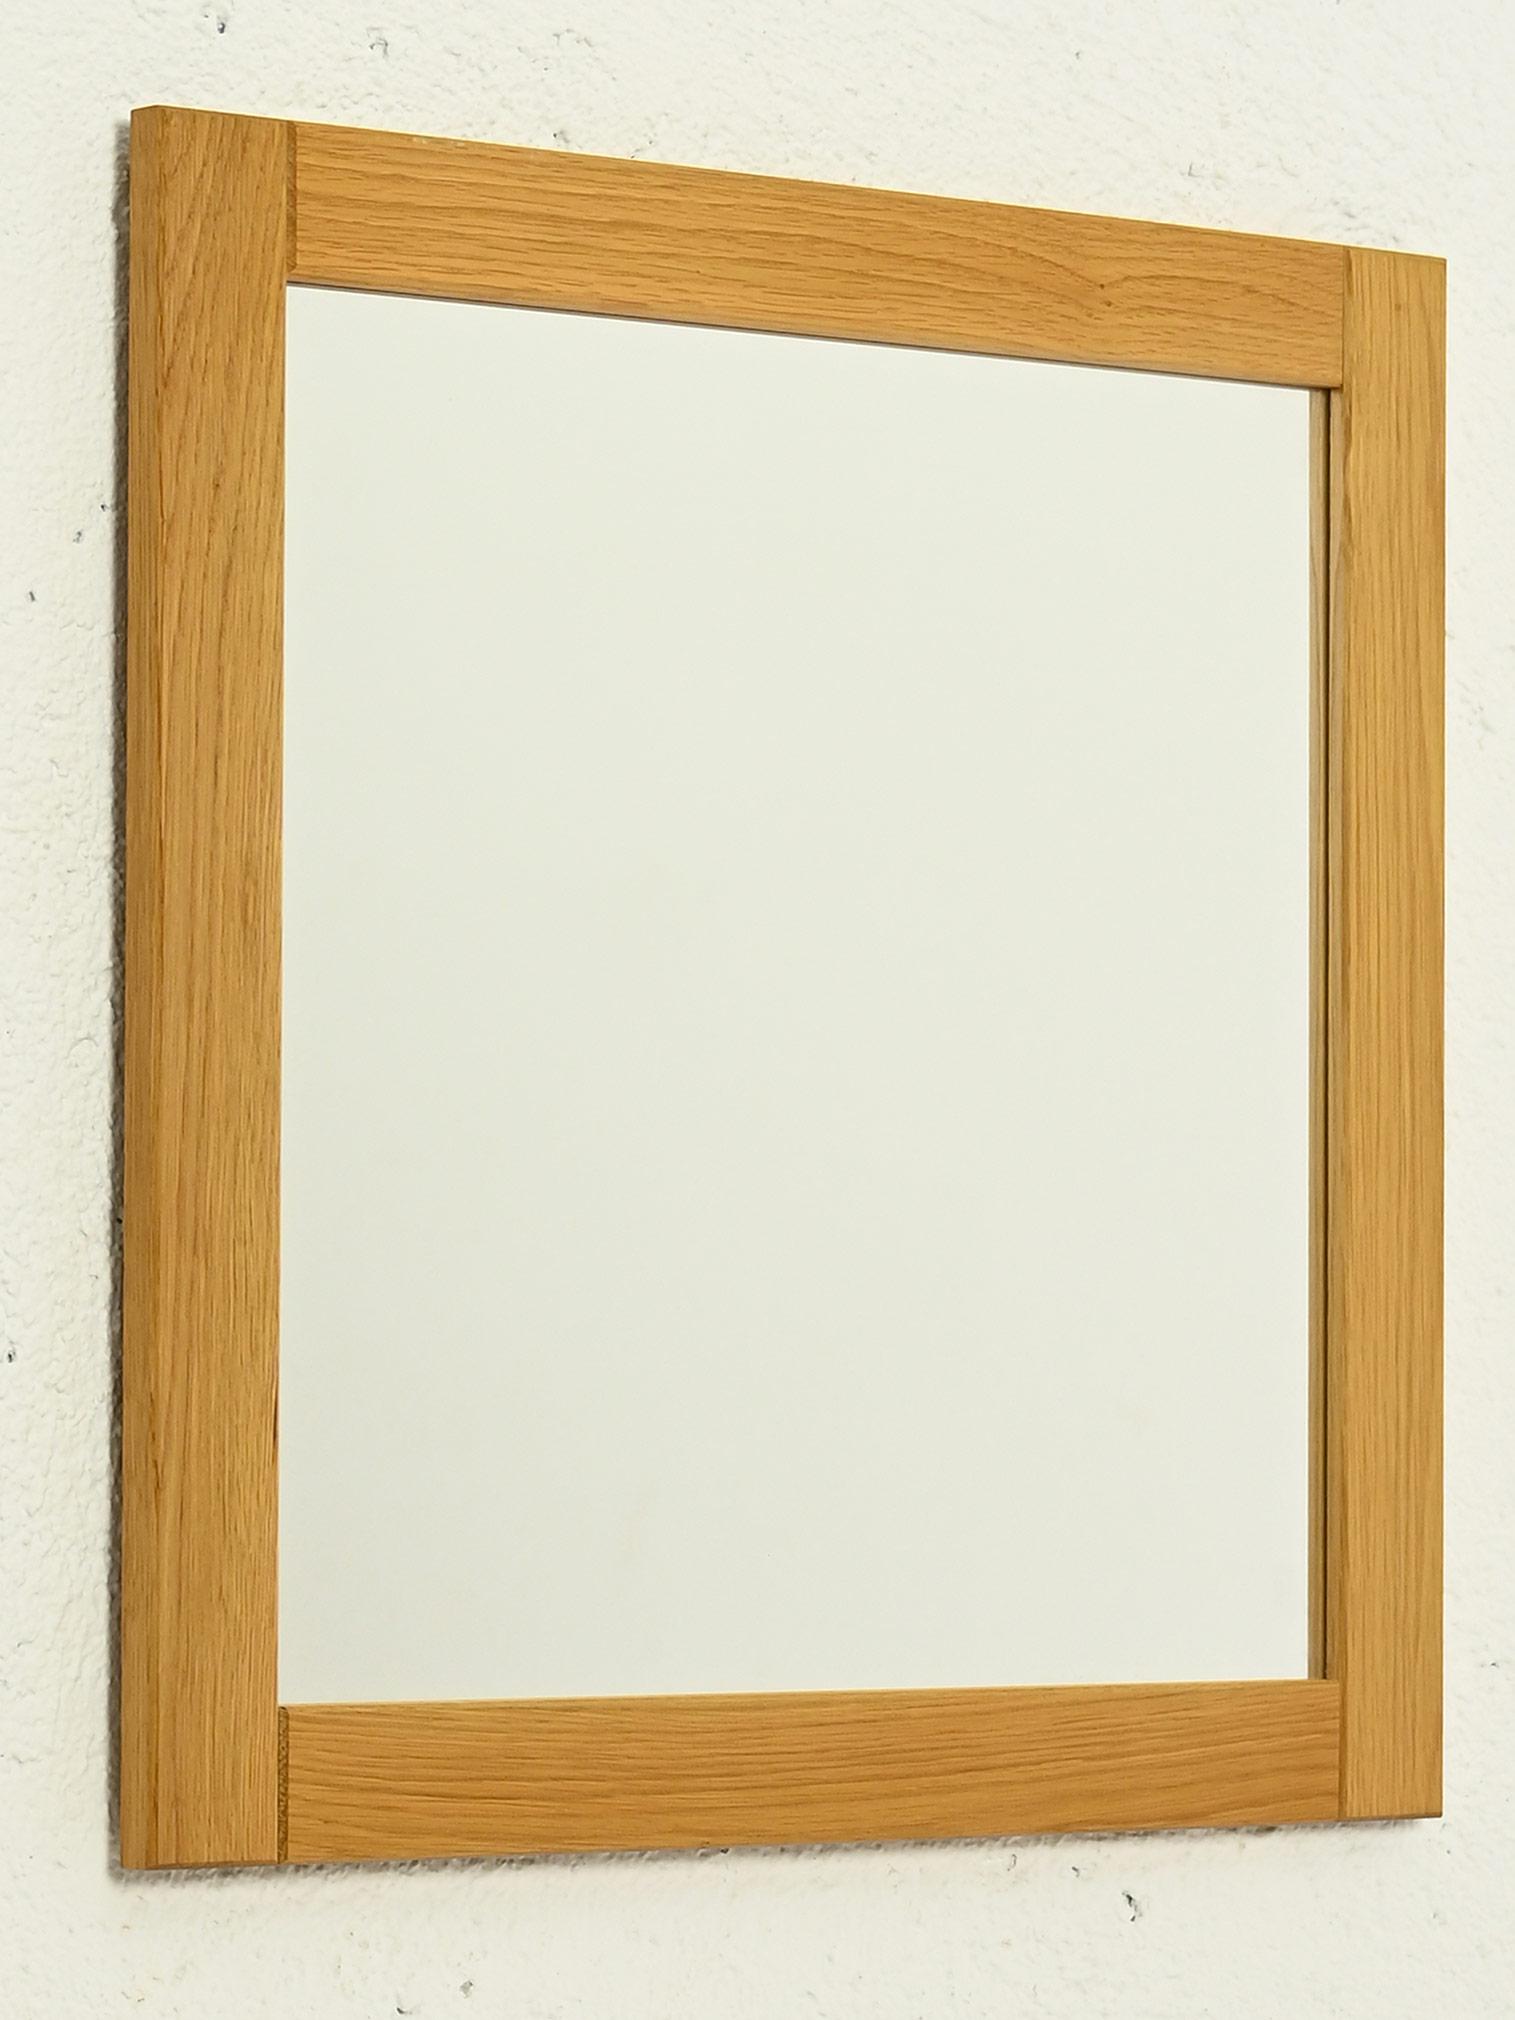 Nordic 1960s oak mirror.

A moderately sized mirror with a thick, square edge, made with clean, classic lines that reflect the elegance of Scandinavian craftsmanship.
This oak mirror gives a warm and welcoming touch for those who appreciate